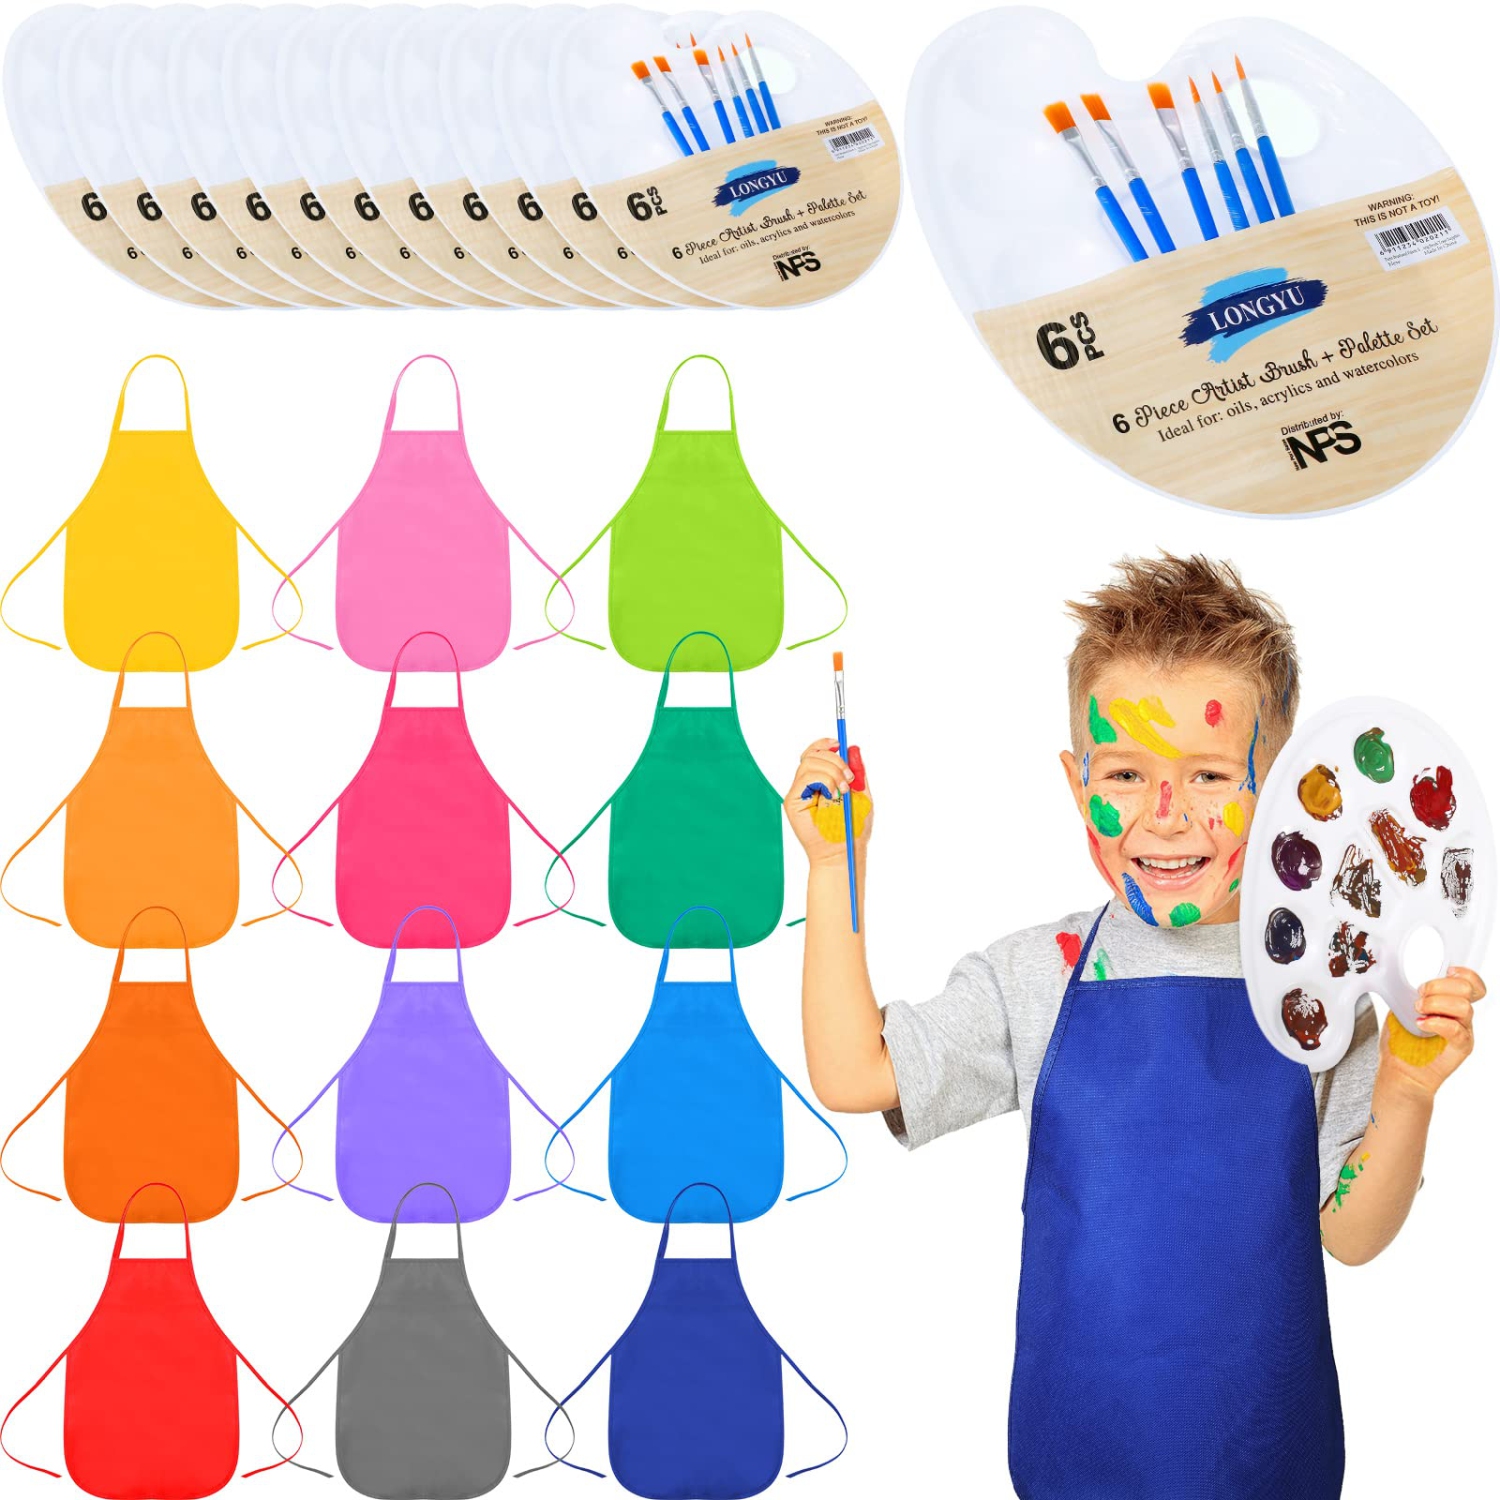 KidzArt 12-Pack Paint Party Set: Flat Paint Pallet Brush Set, Children's Fabric Aprons, and Tray for Kitchen & Classroom Art Painting Activity